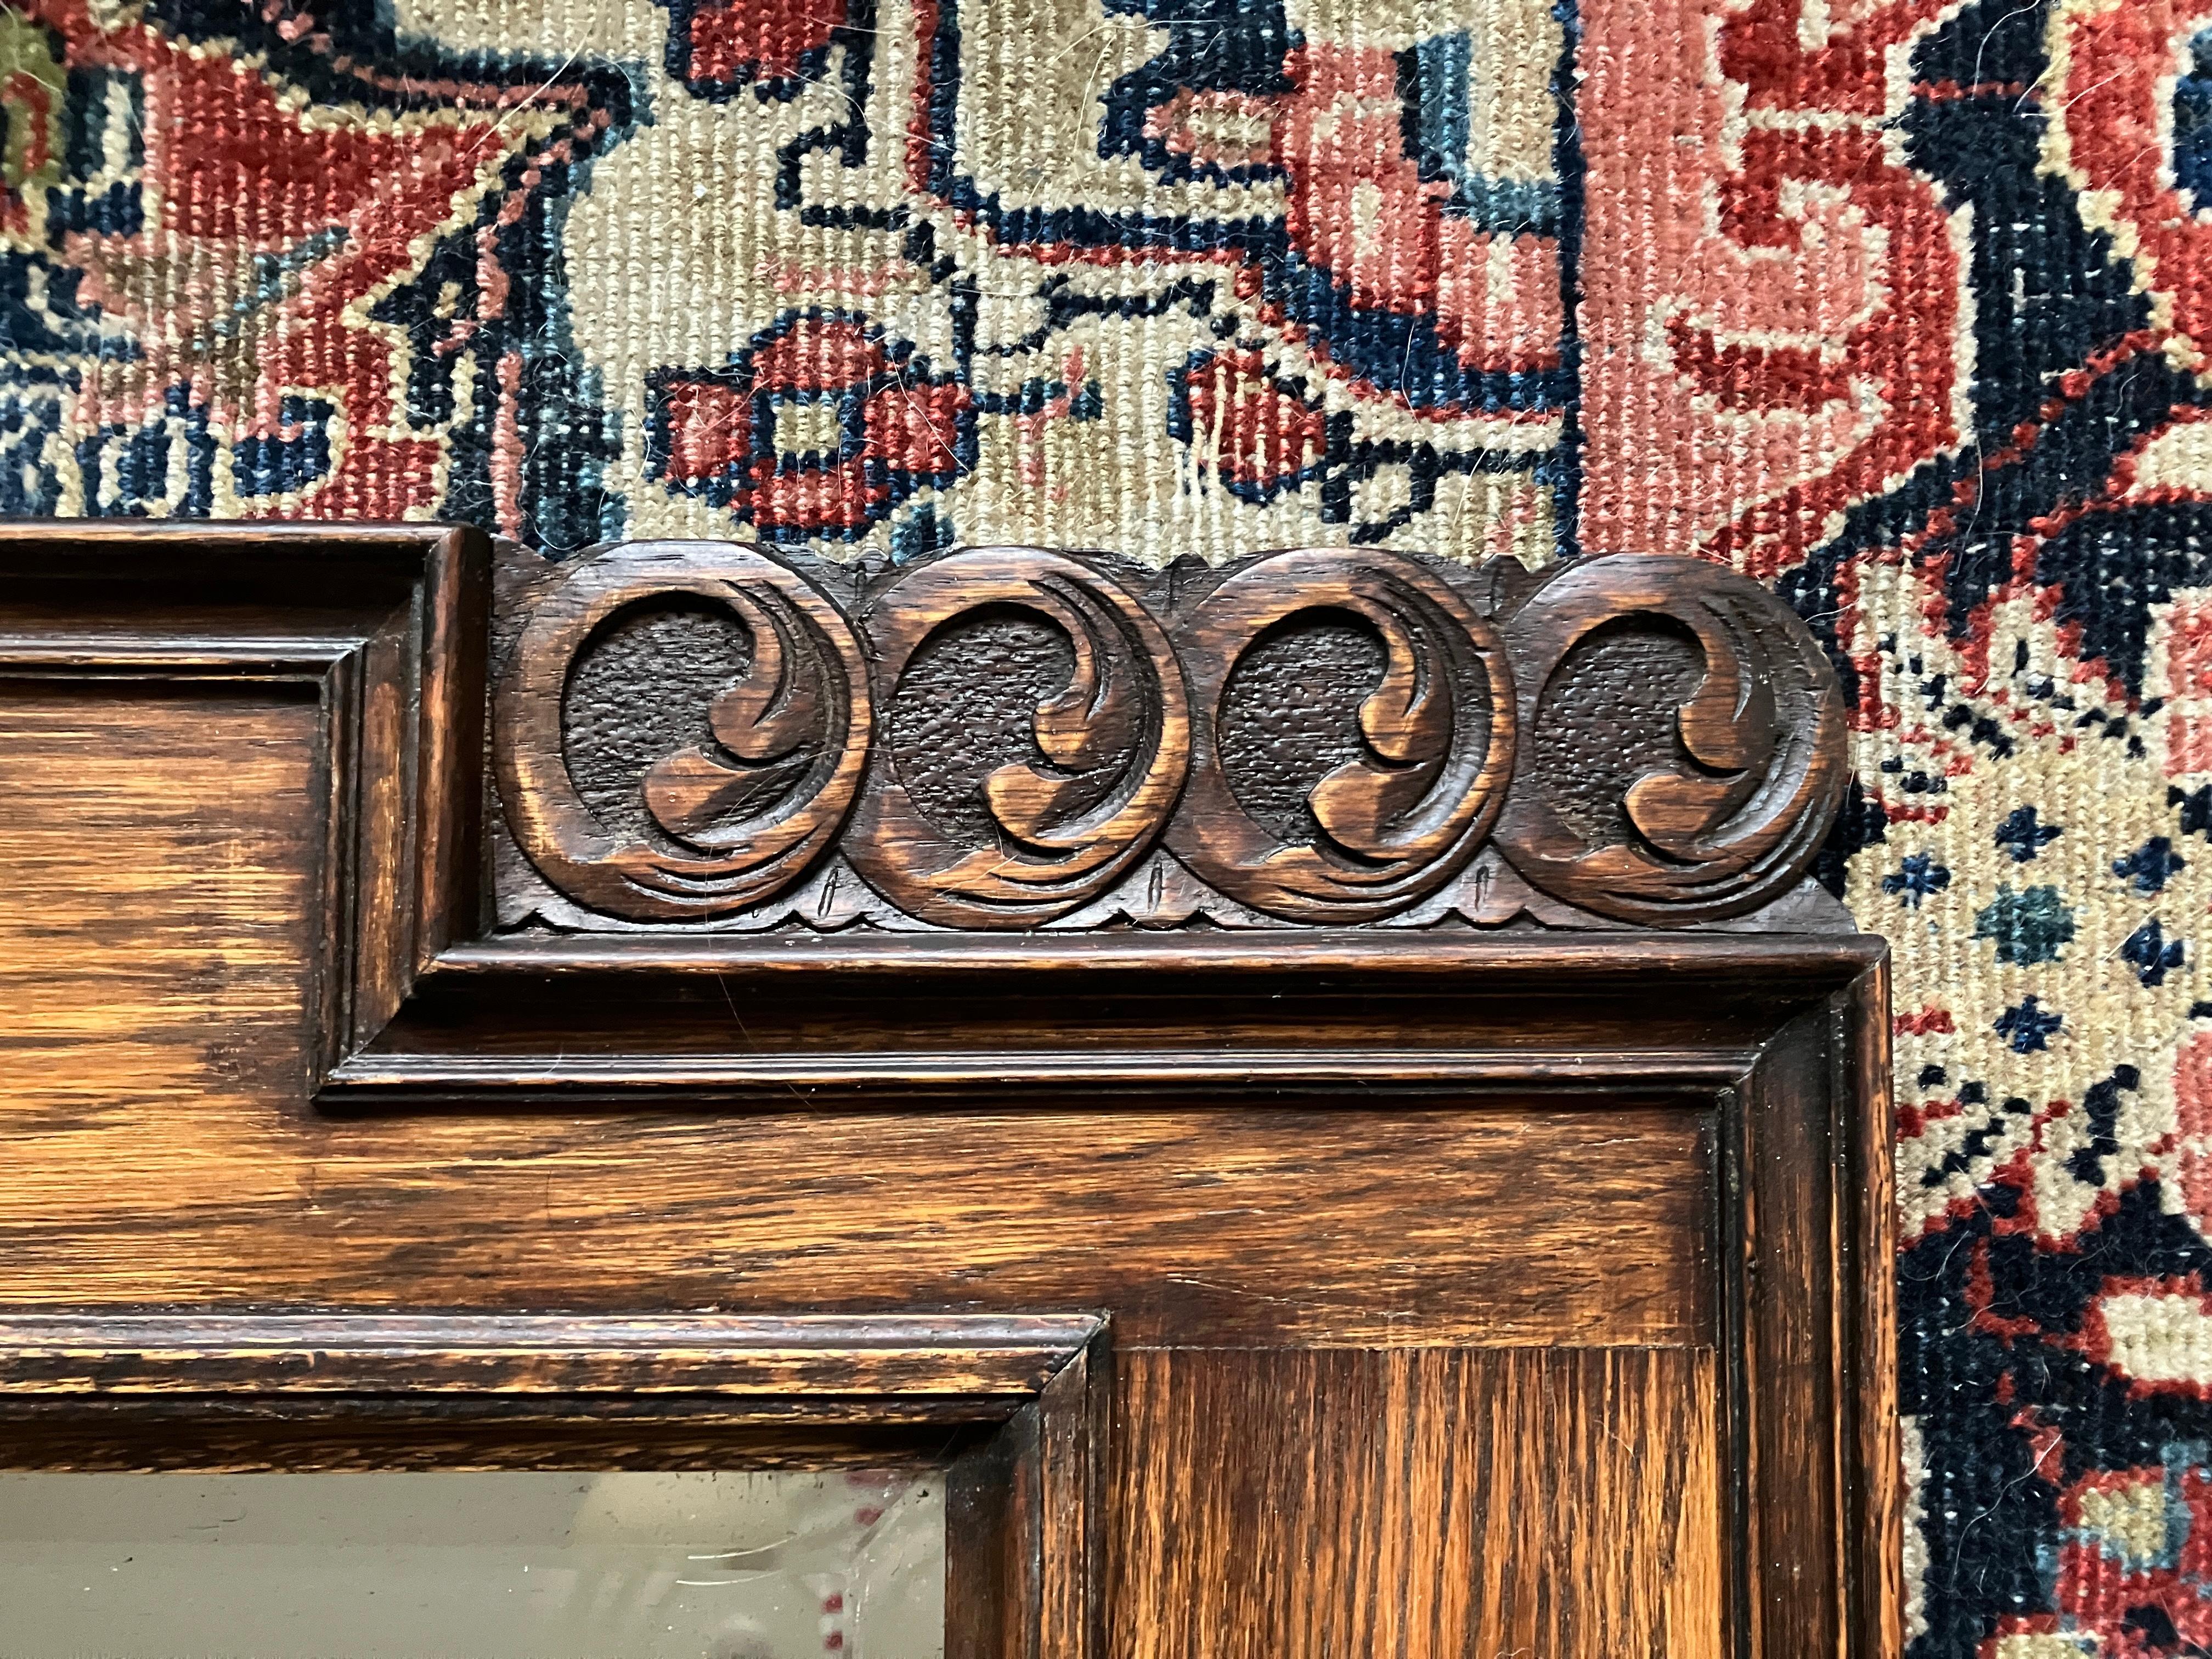 Hand-Carved Large Decorative English Oak Framed Art & Crafts Mantel Mirror Late 19th Century For Sale